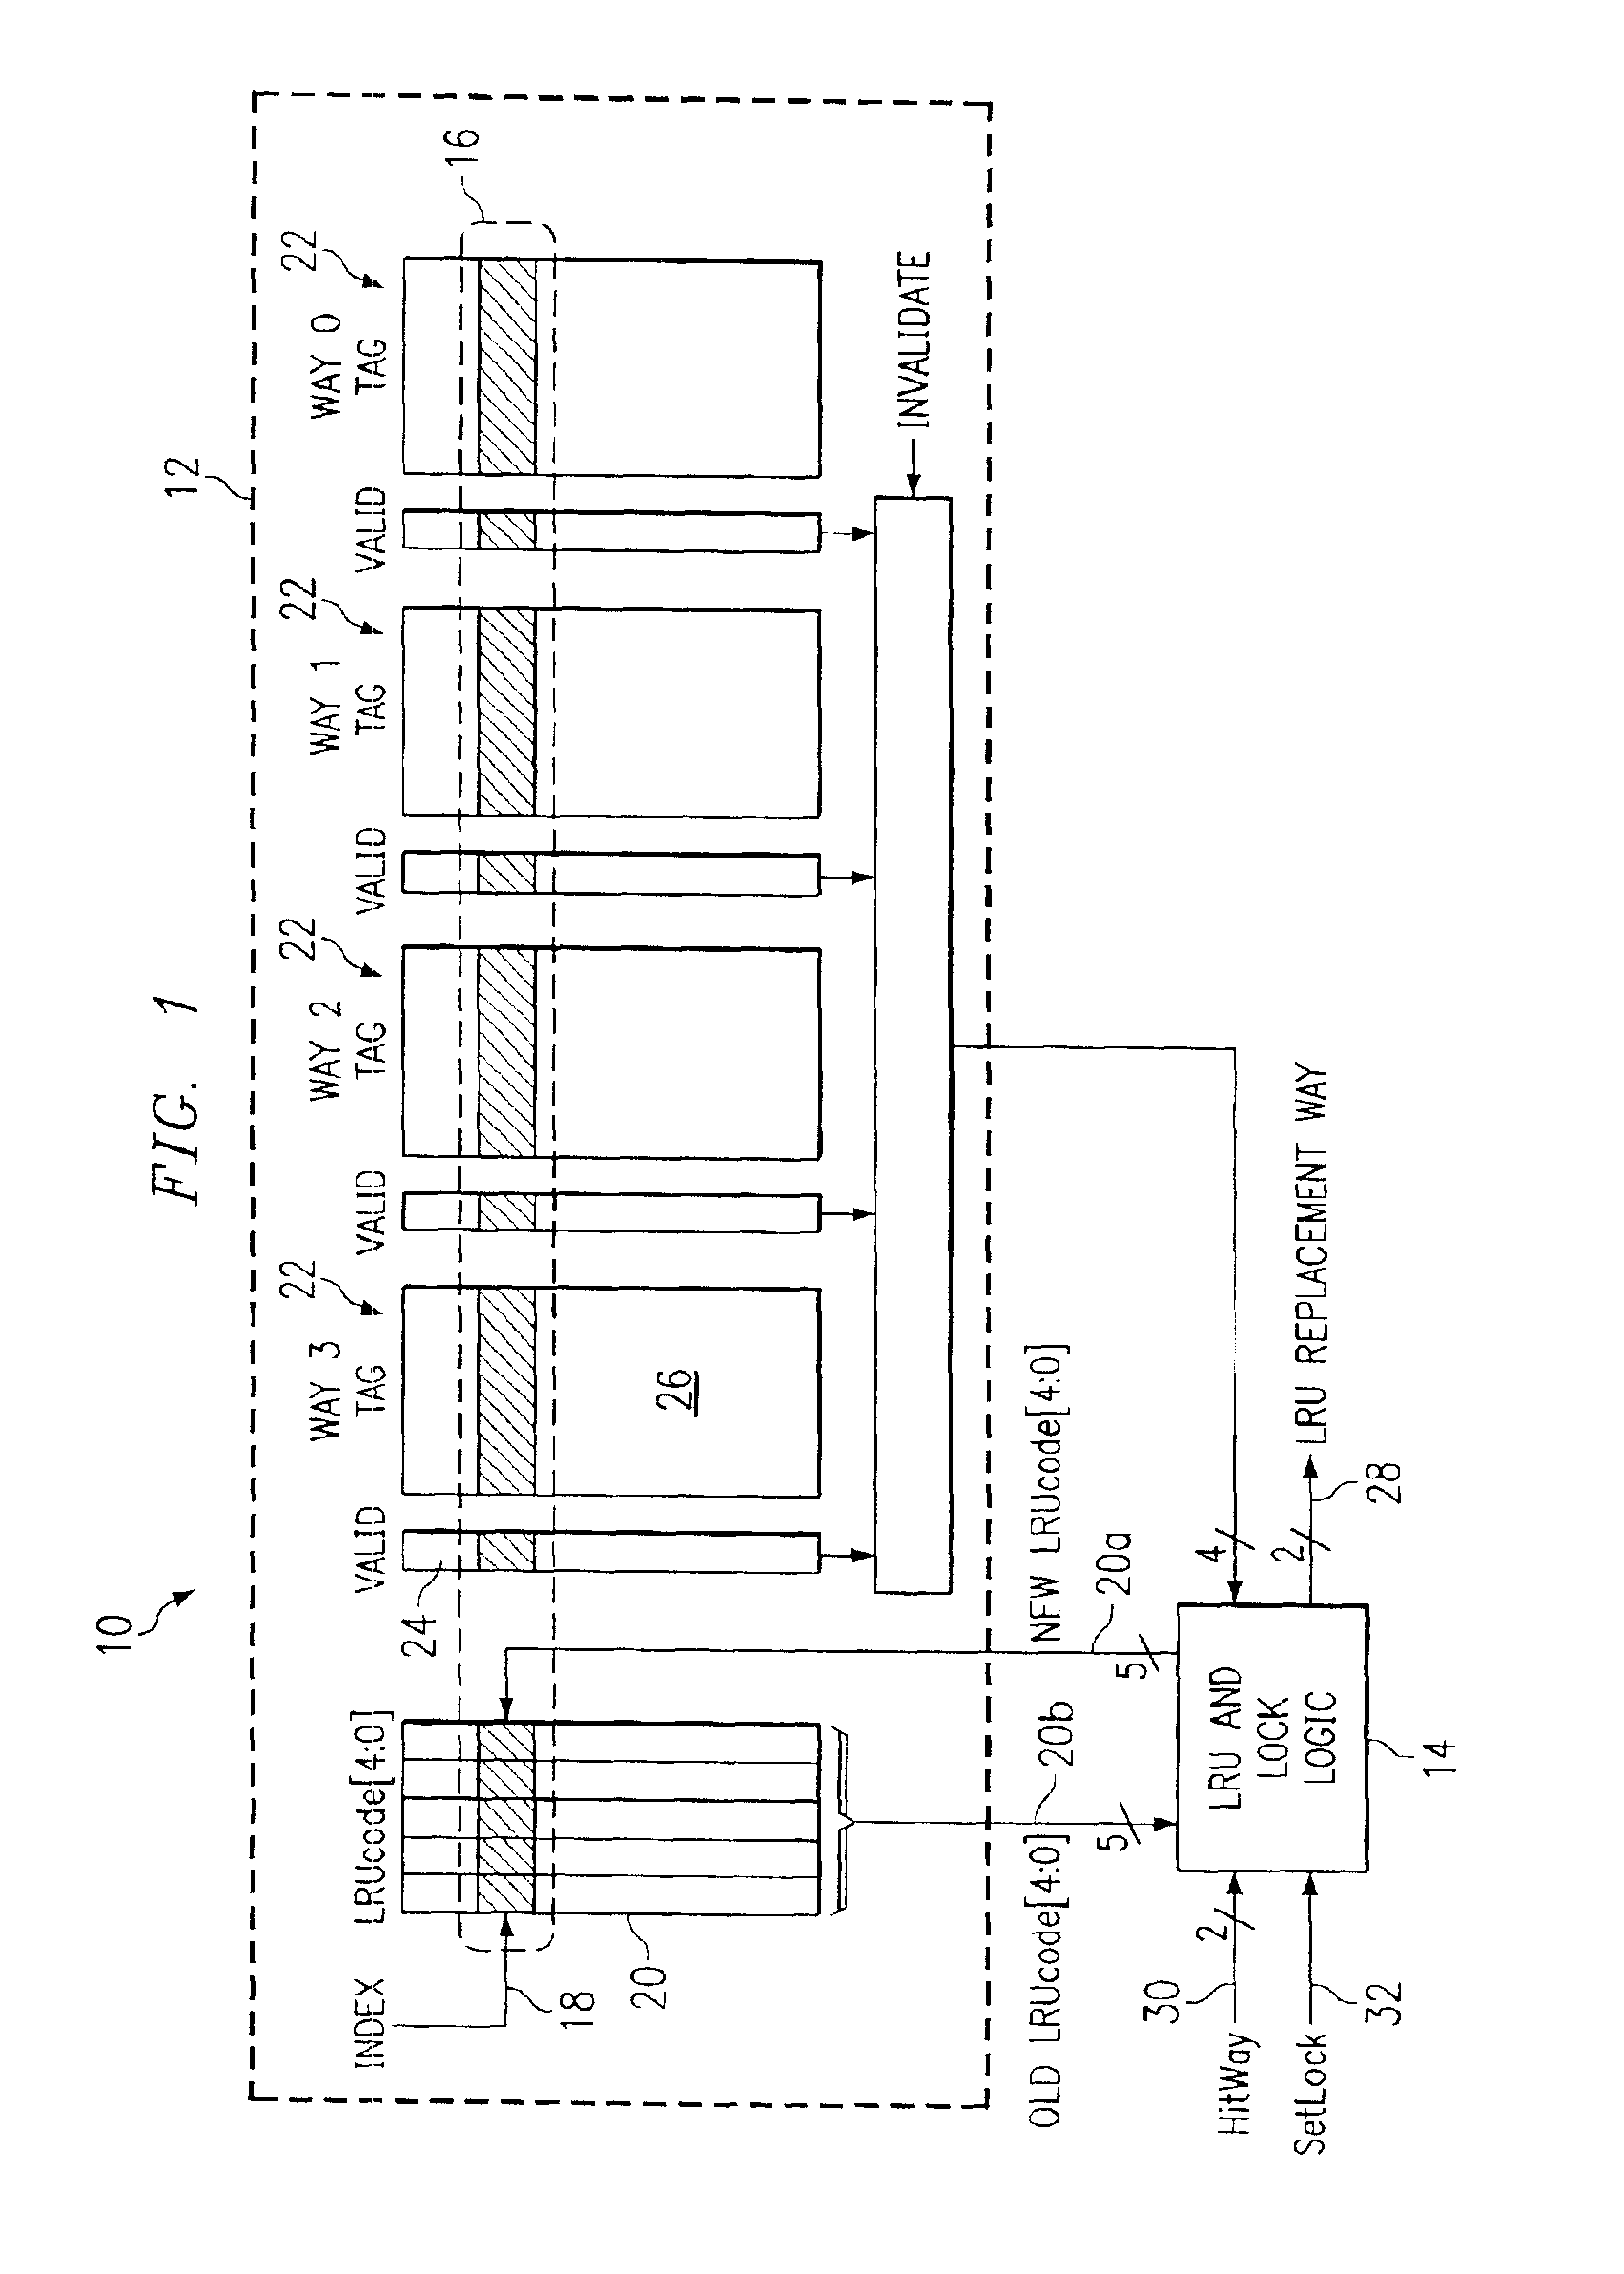 Cache memory for identifying locked and least recently used storage locations